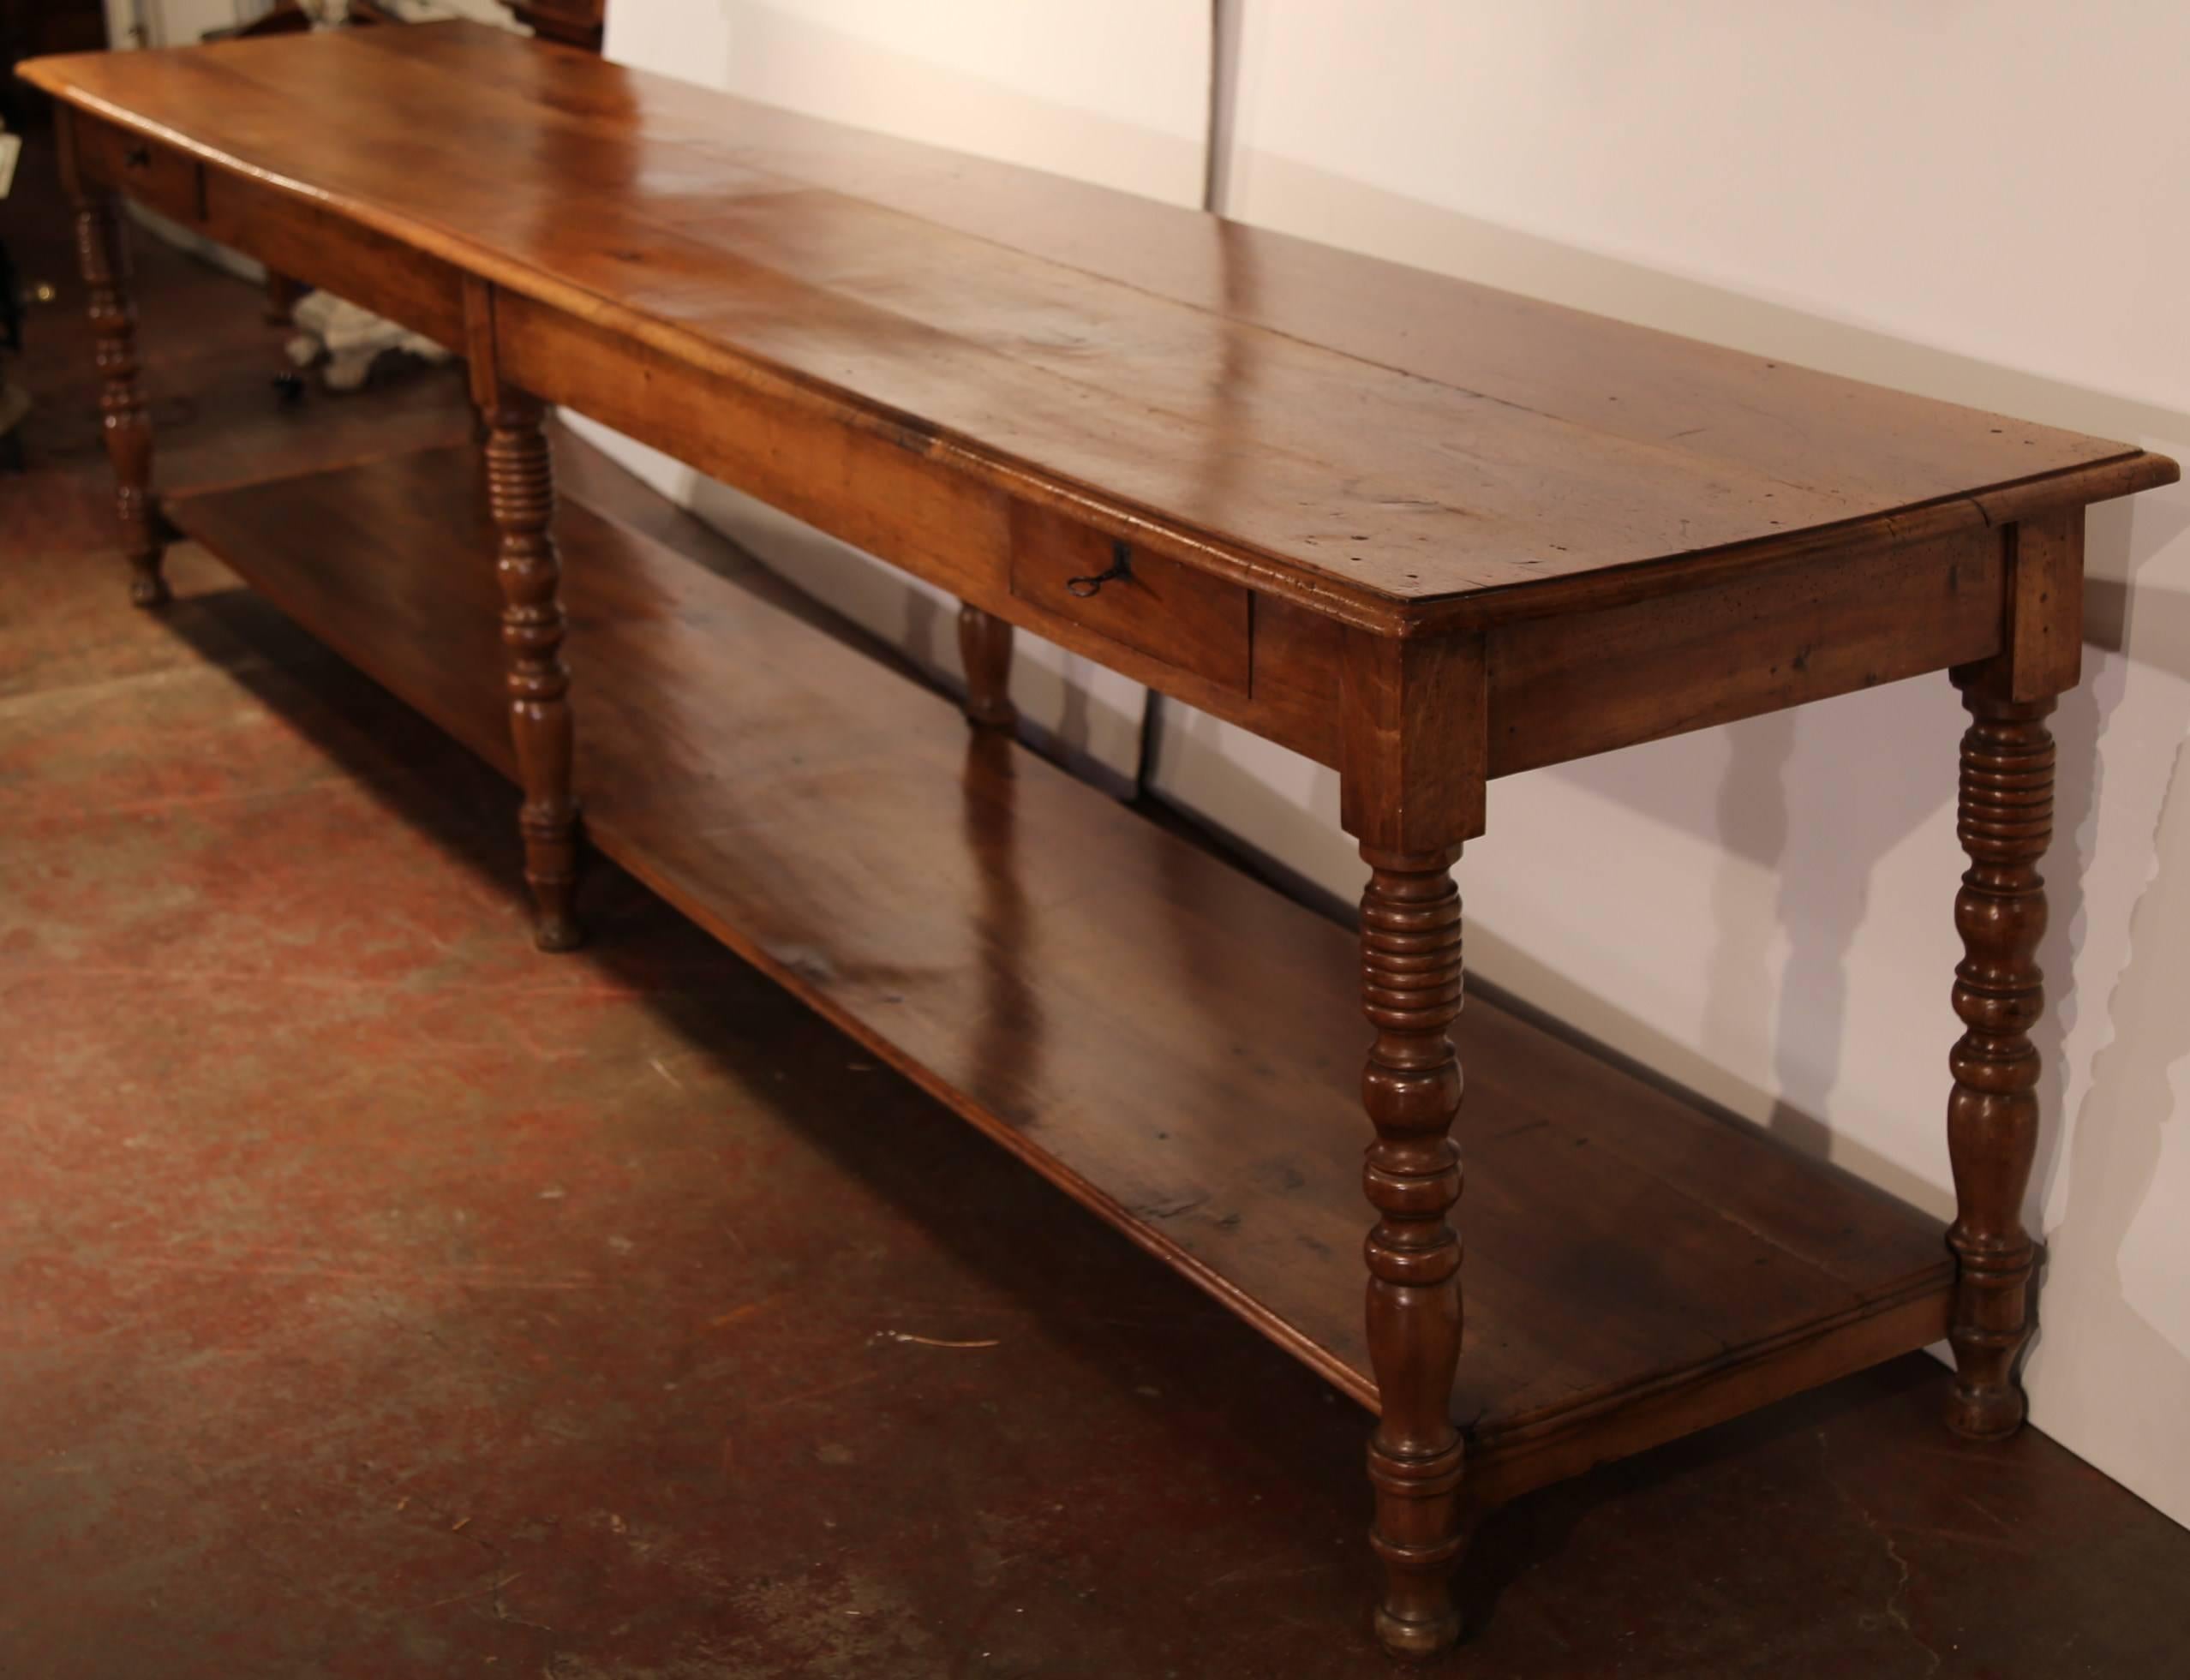 Hand-Carved Large Mid-19th Century French Louis Philippe Walnut Six-Leg Draper's Table